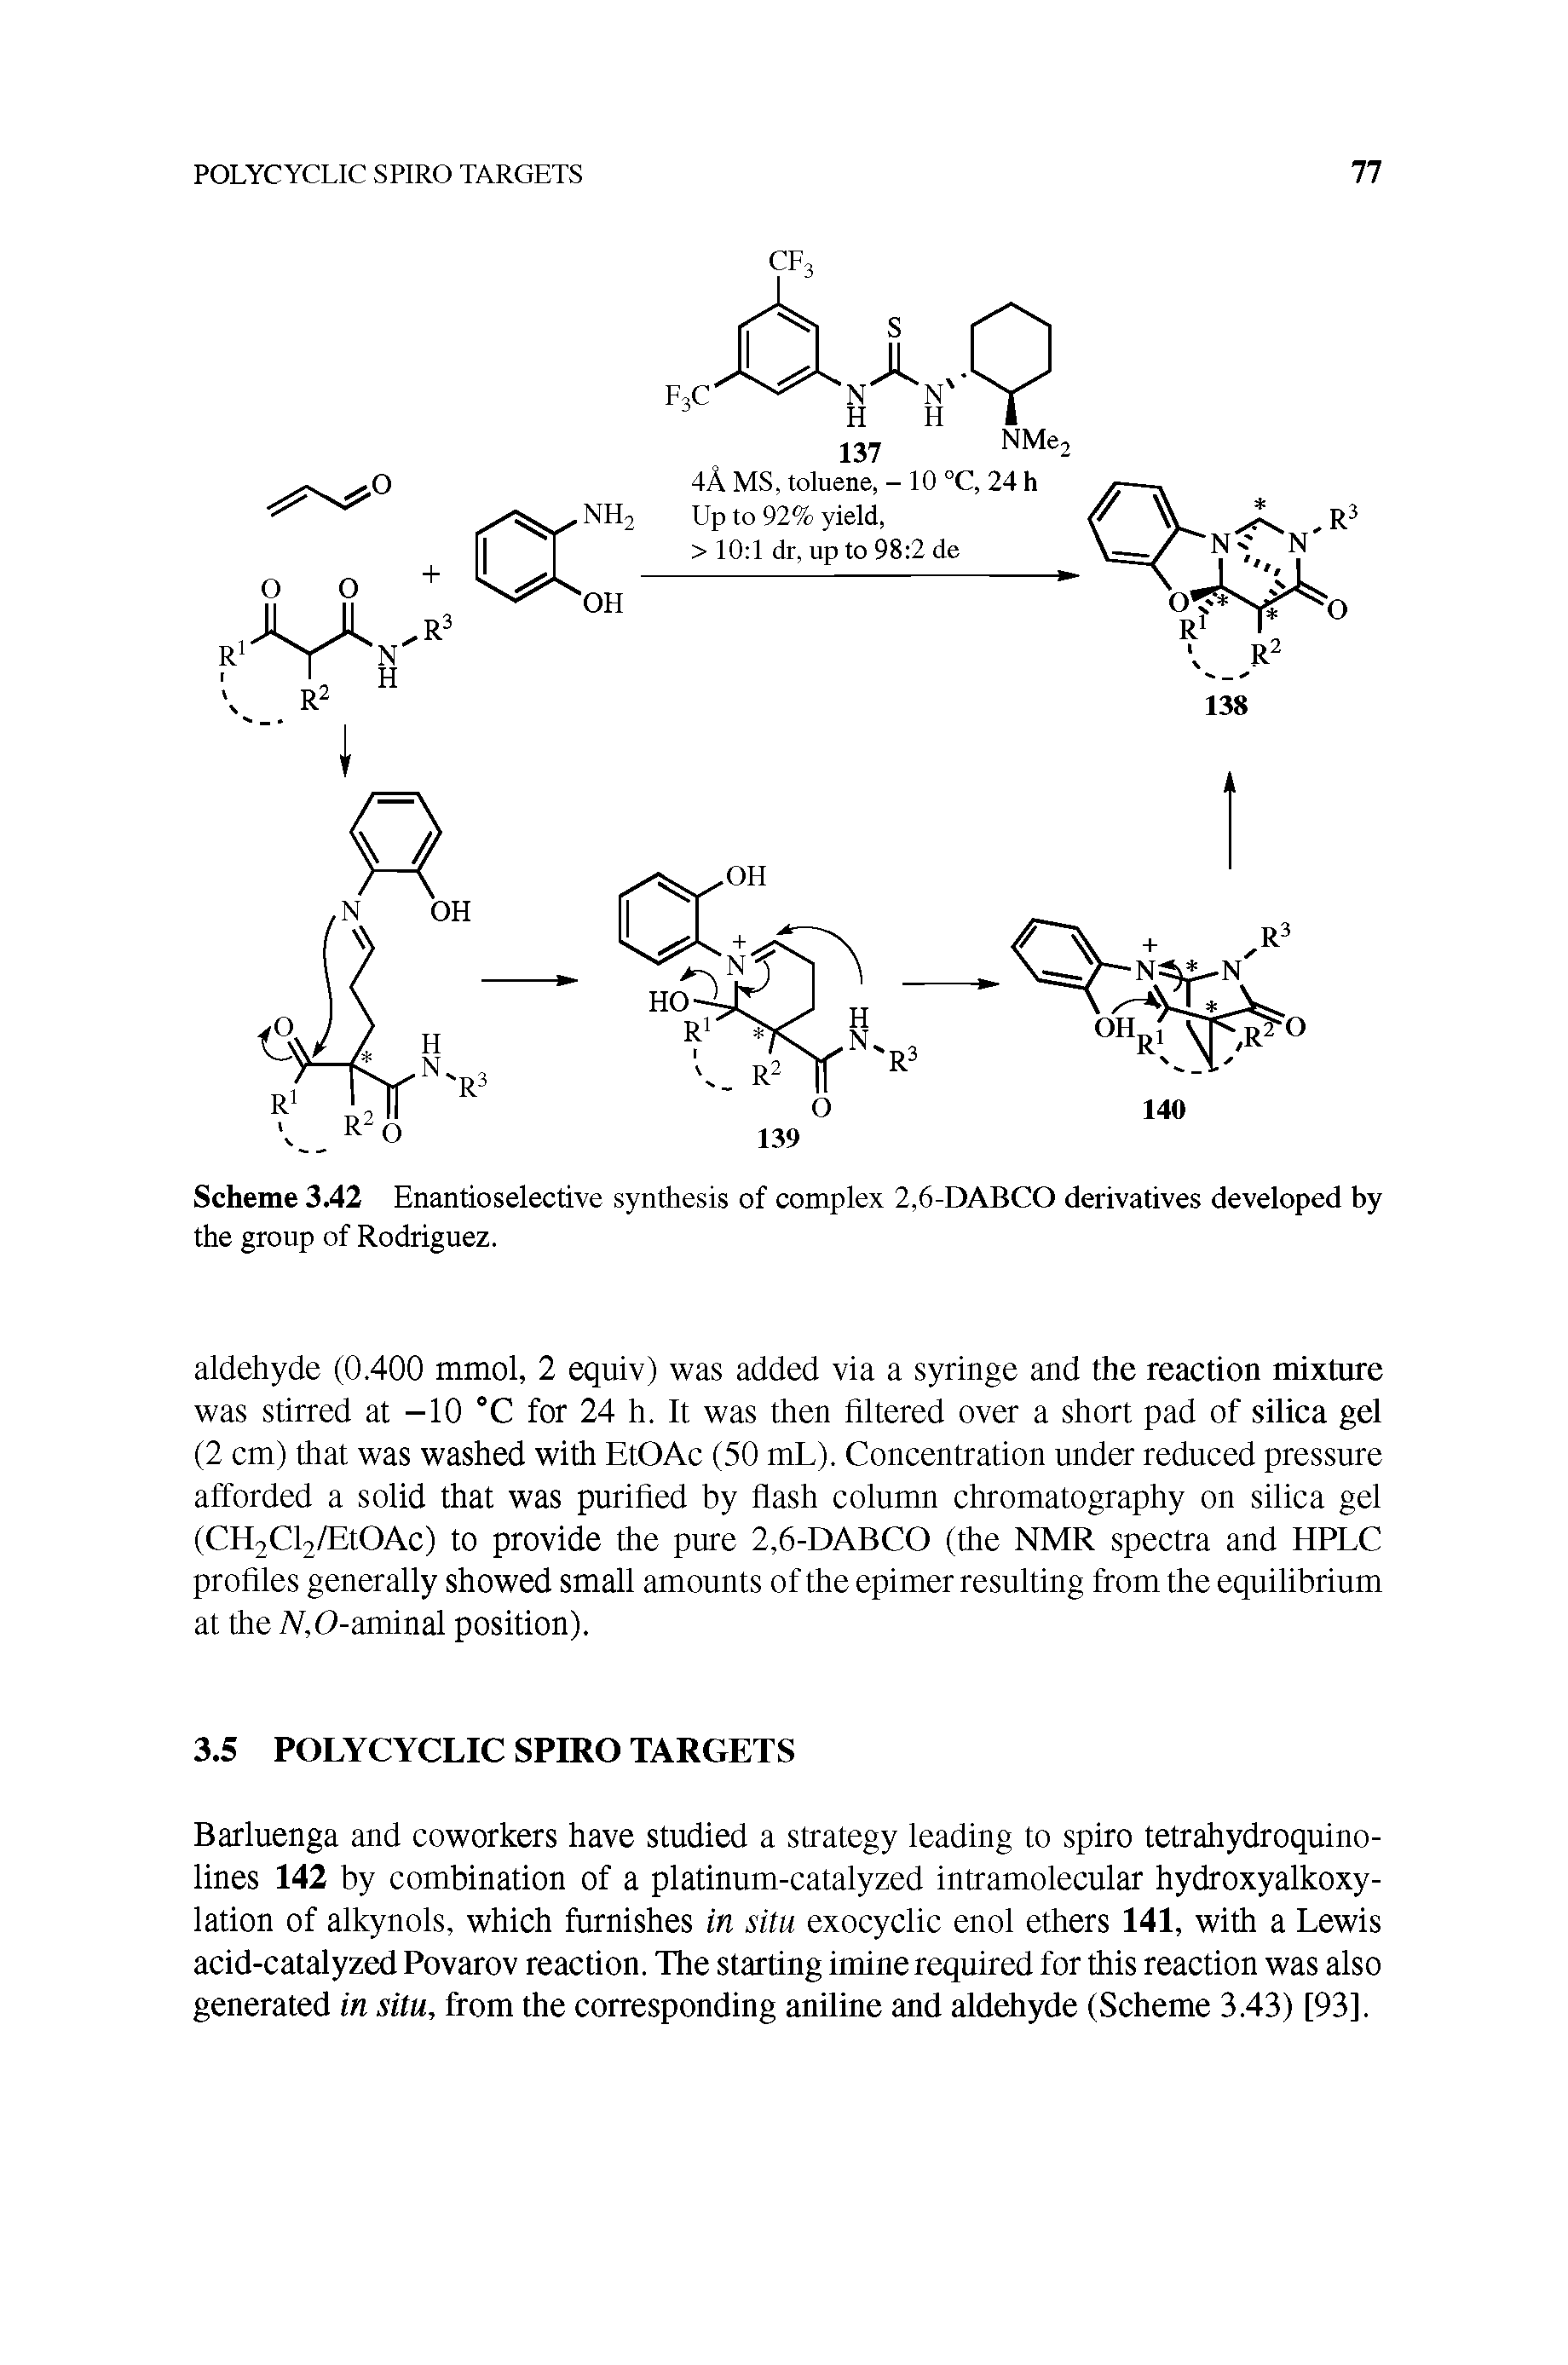 Scheme 3.42 Enantioselective synthesis of complex 2,6-DABCO derivatives developed by the group of Rodriguez.